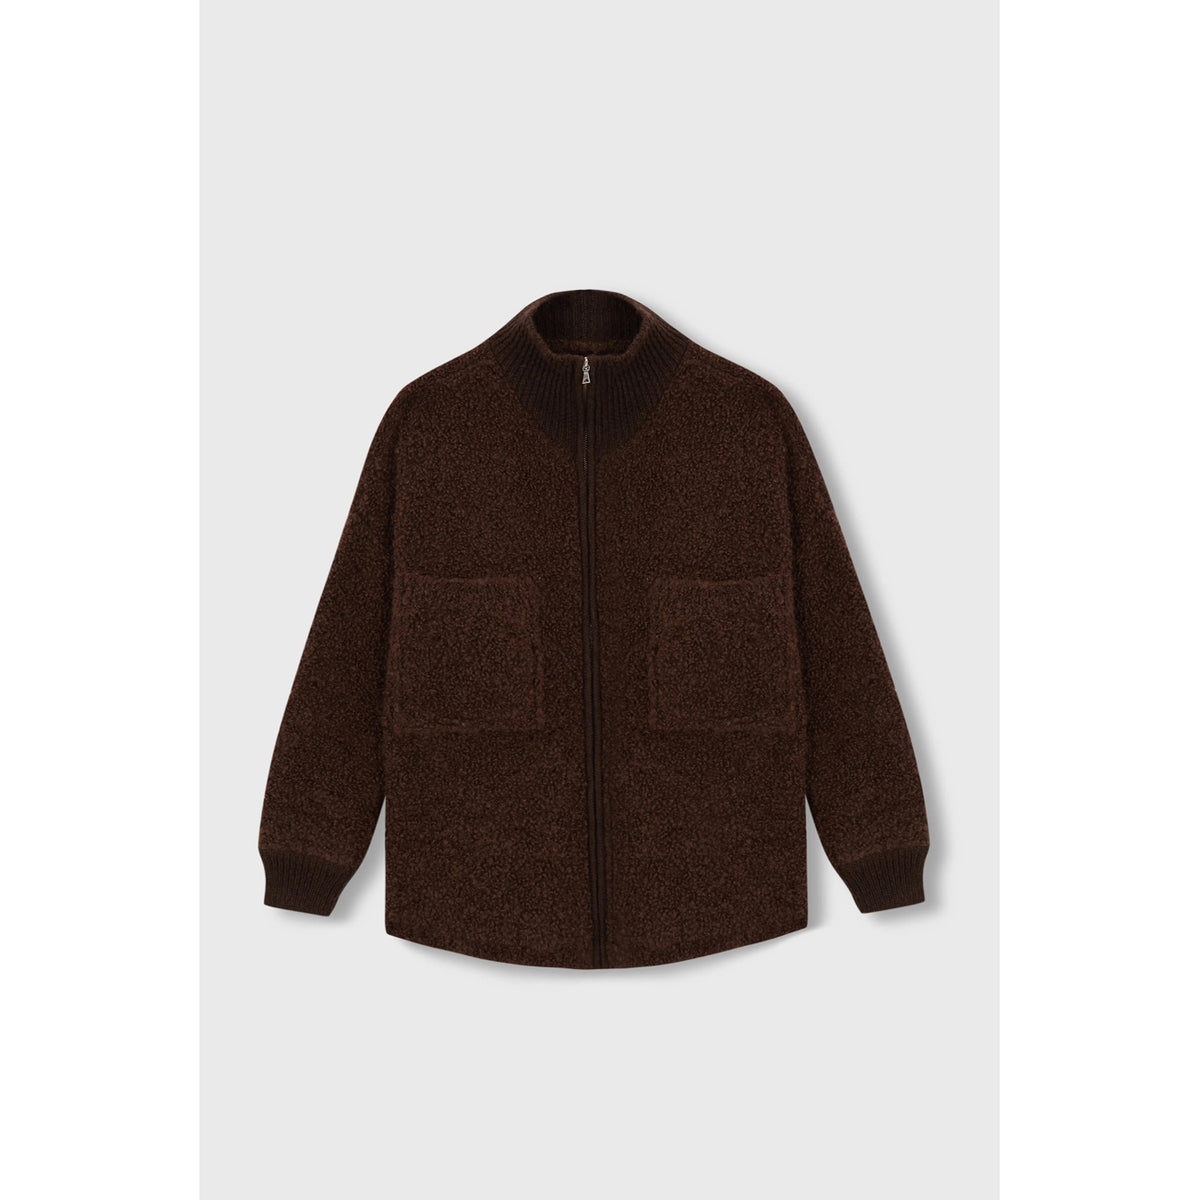 Cordera Wool + Mohair Jacket in Tierra – a case of you